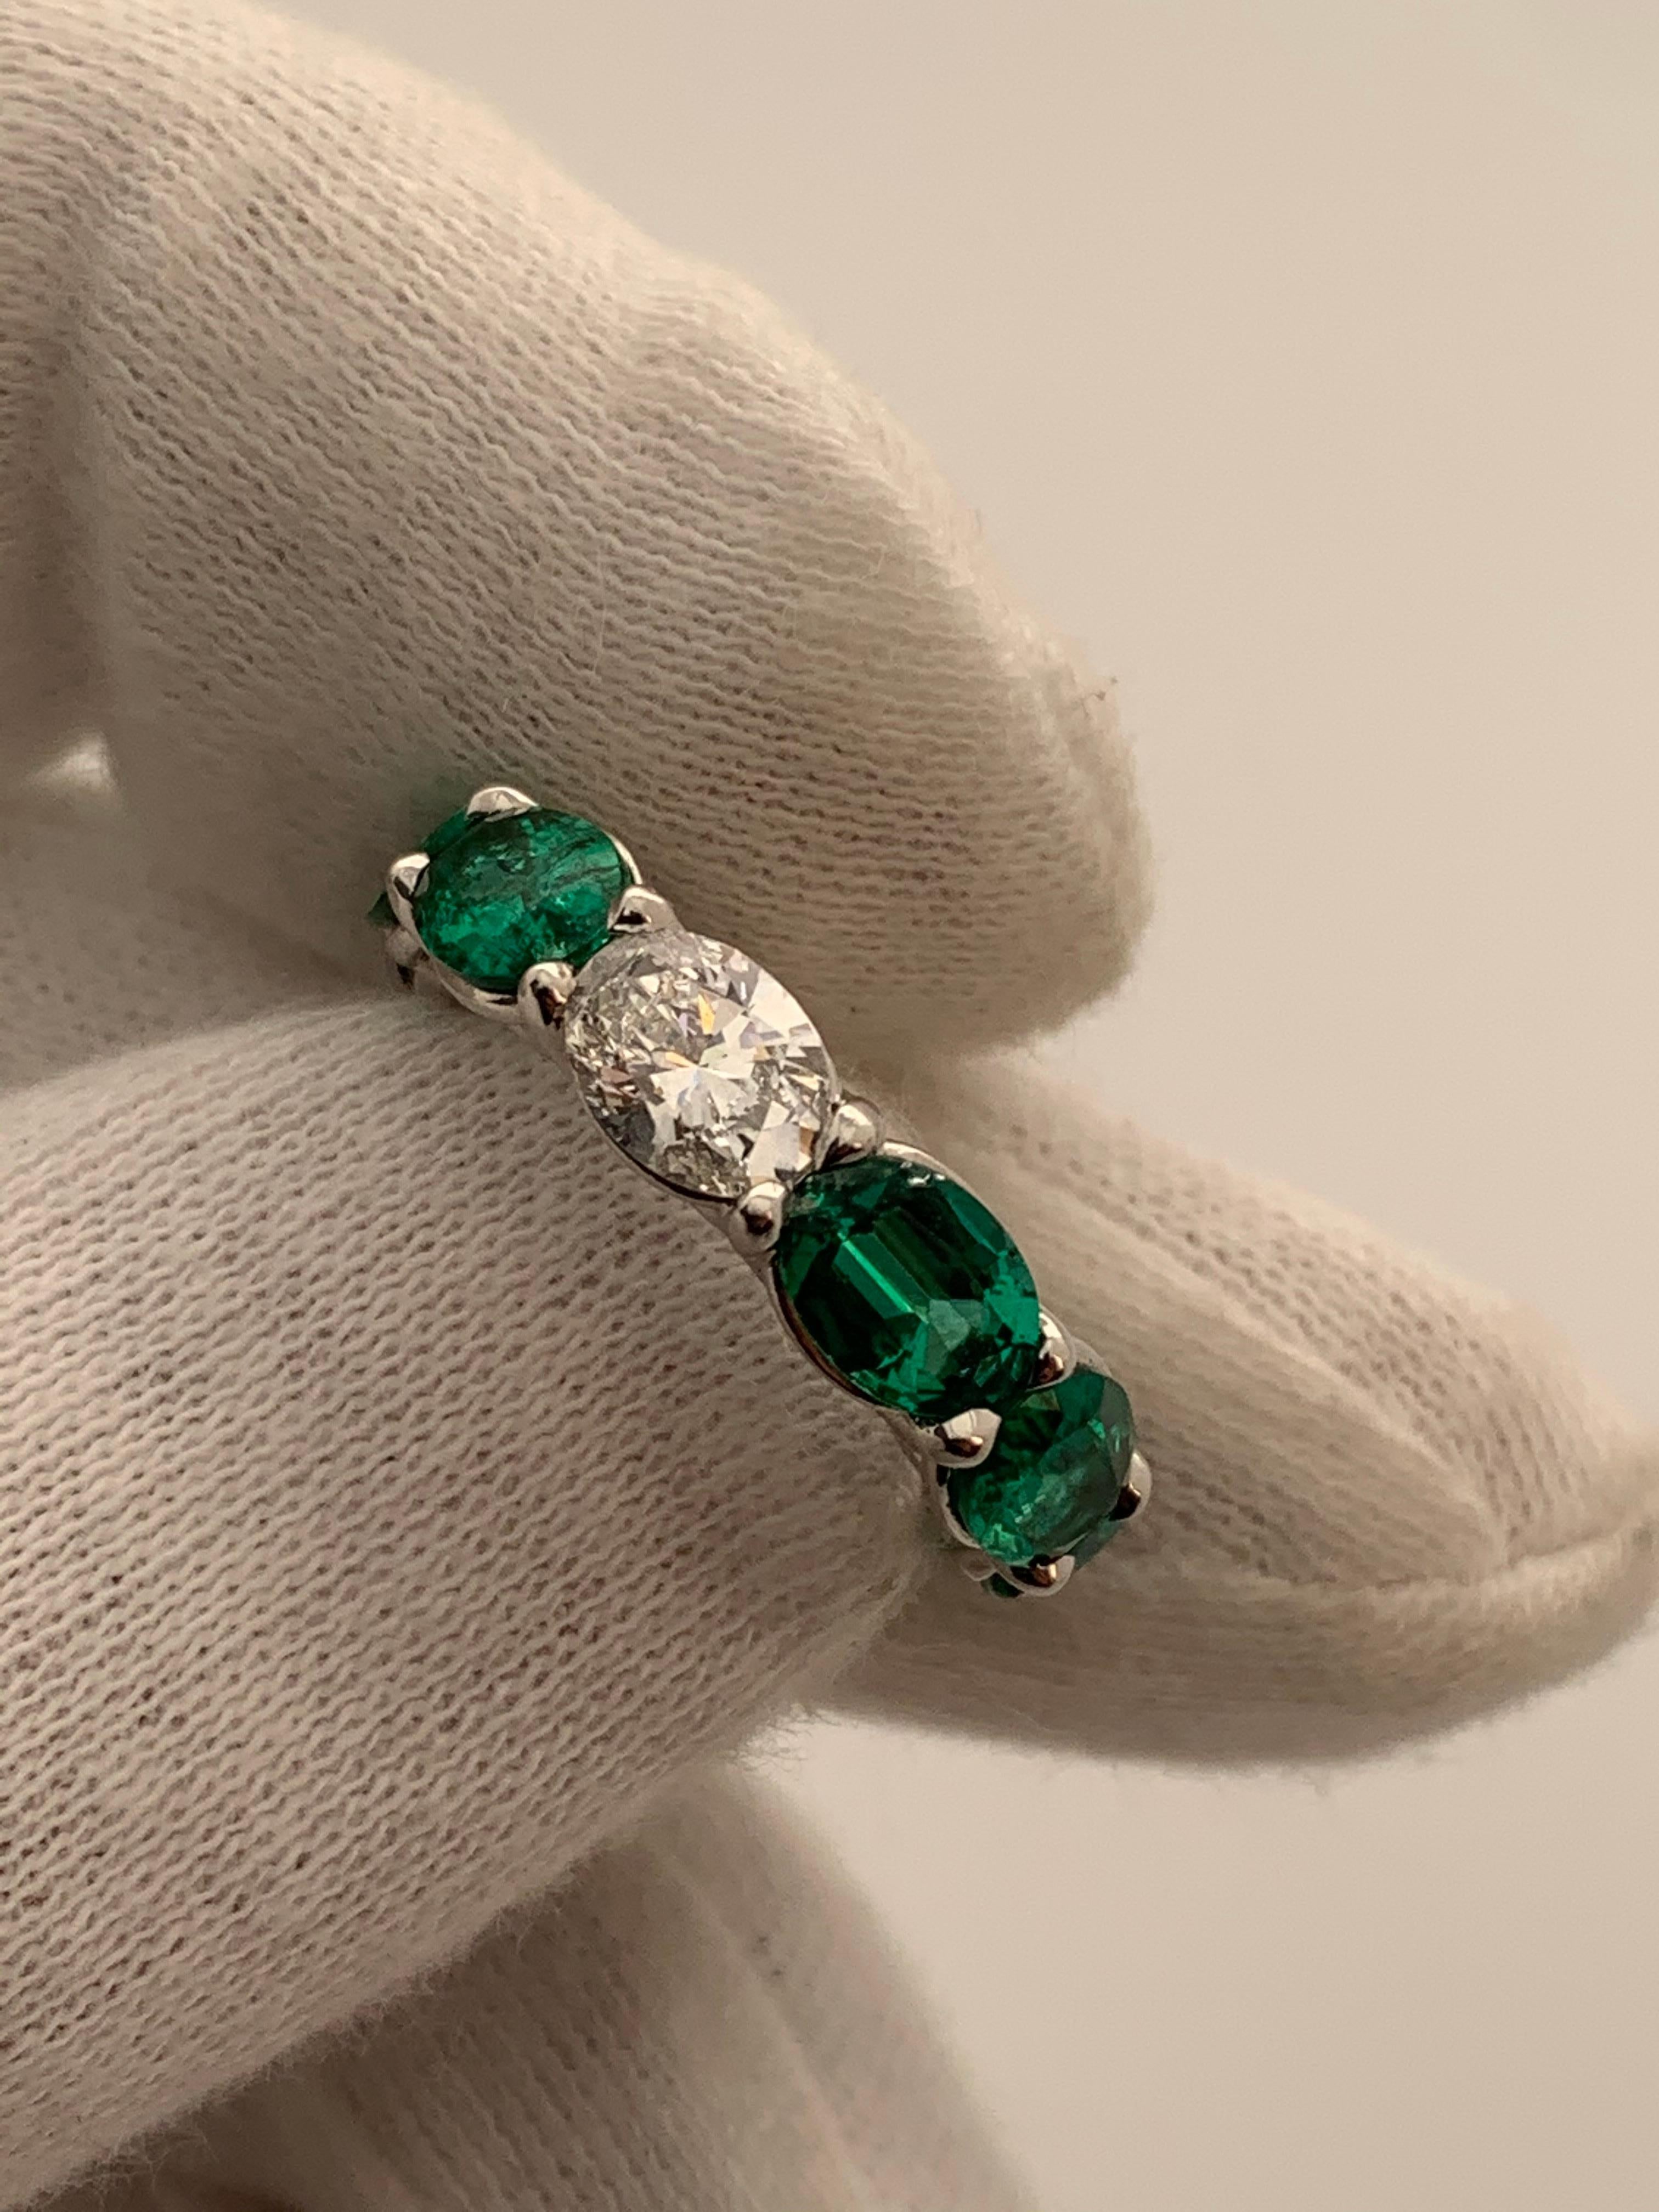 This beautiful Ring features 9 Fine Oval Shaped Emeralds weighing 6.18 Carats with 1 Oval Diamond weighing 0.71 Carat that can be worn Diamond side up or down. Set in Platinum.
Finger Size 5.
Can be resized.
Also available in other Gemstones.